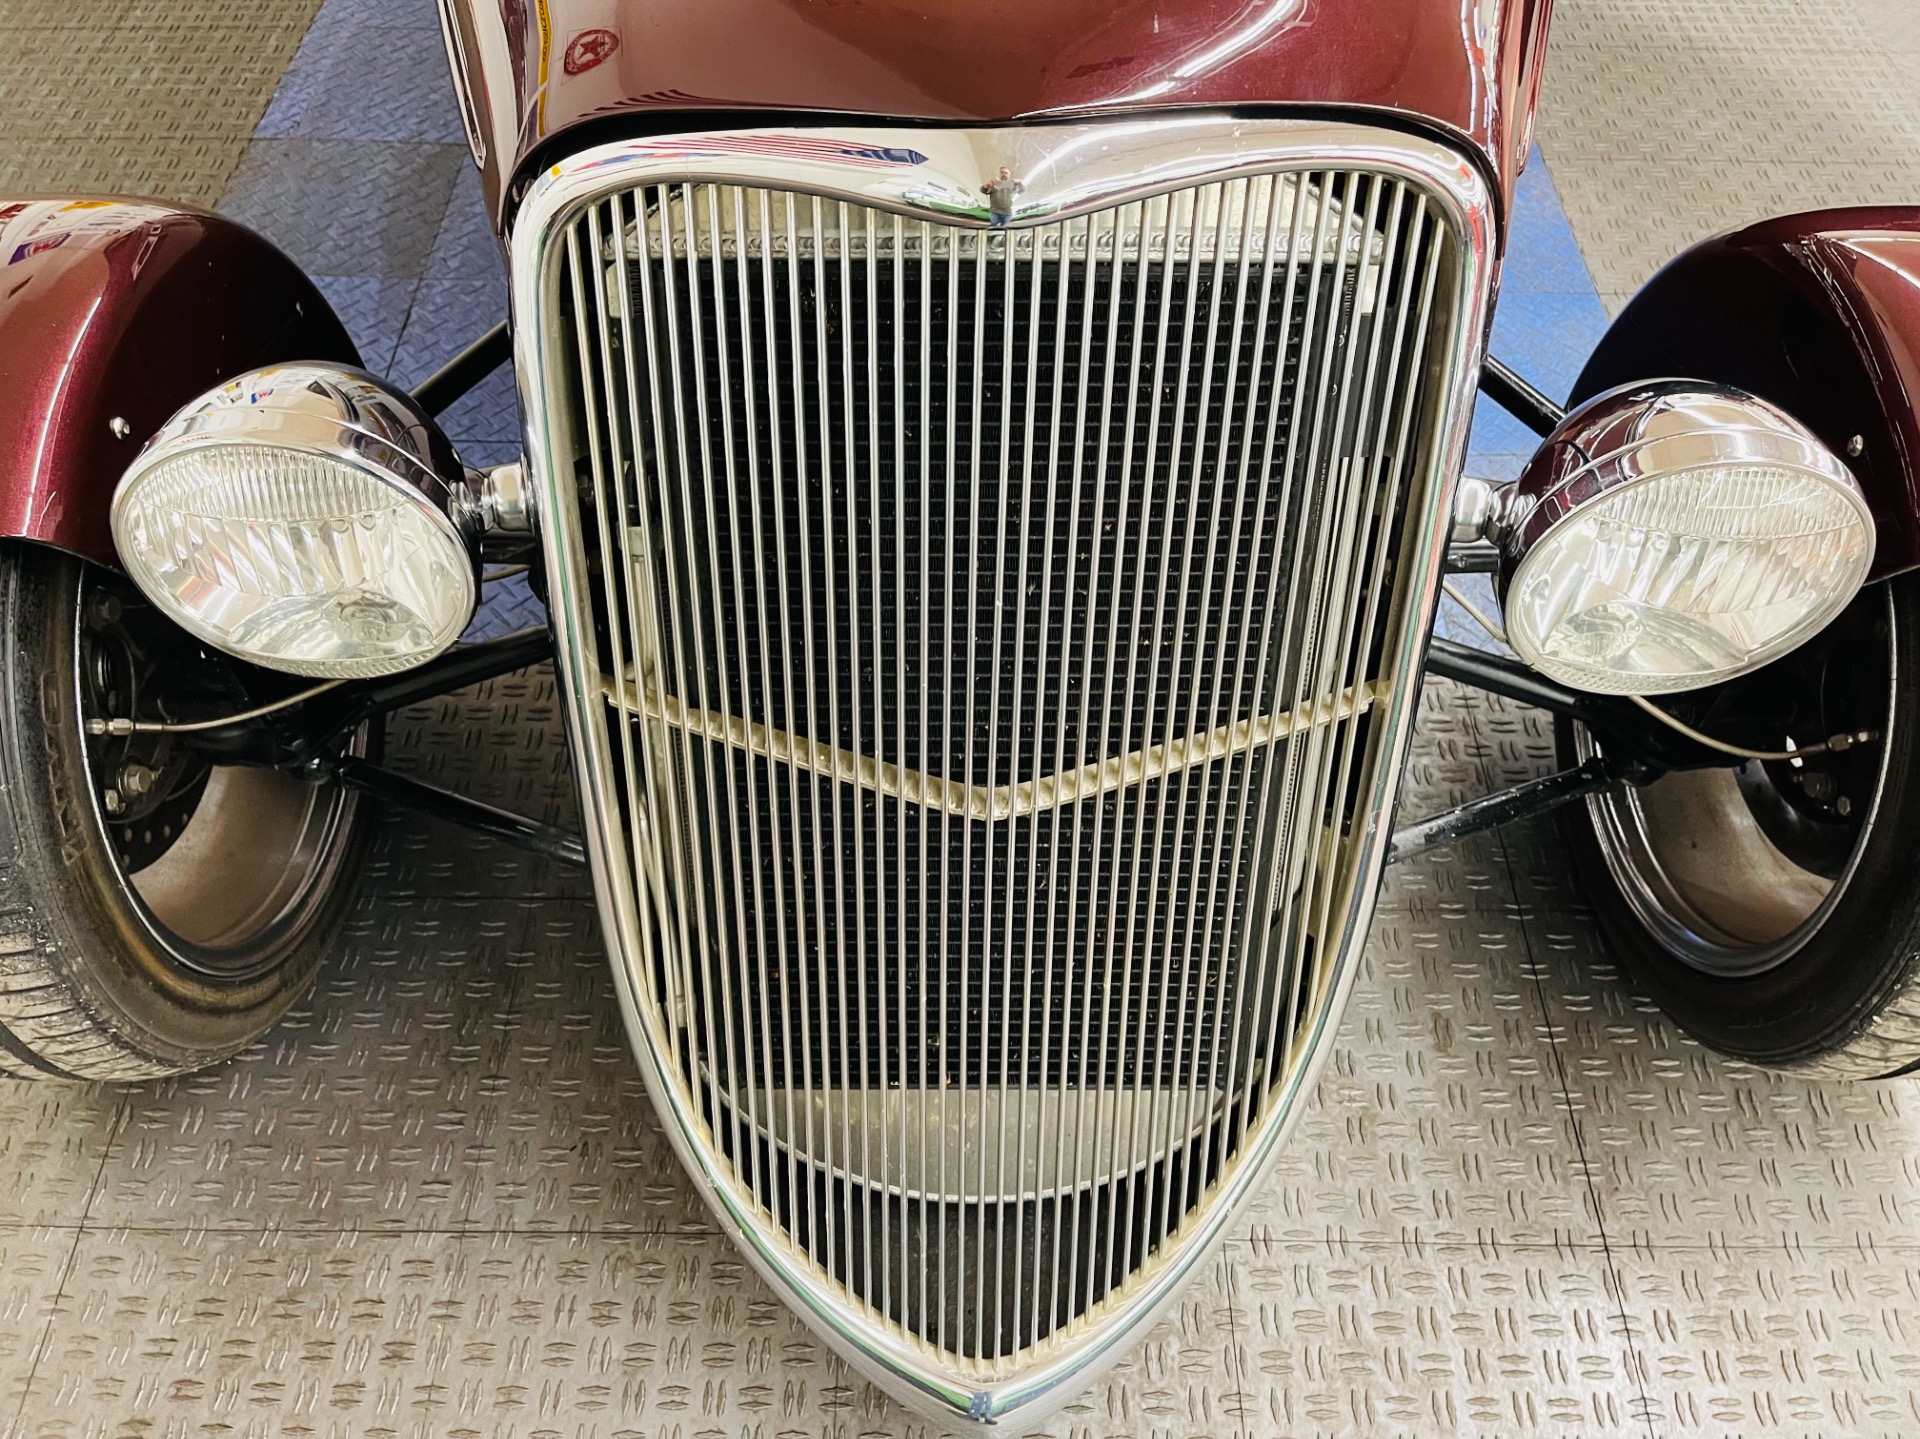 Used 1933 Ford Hot Rod / Street Rod - FACTORY FIVE ROADSTER - 6.0L L76 ENGINE - SEE VIDEO | Mundelein, IL